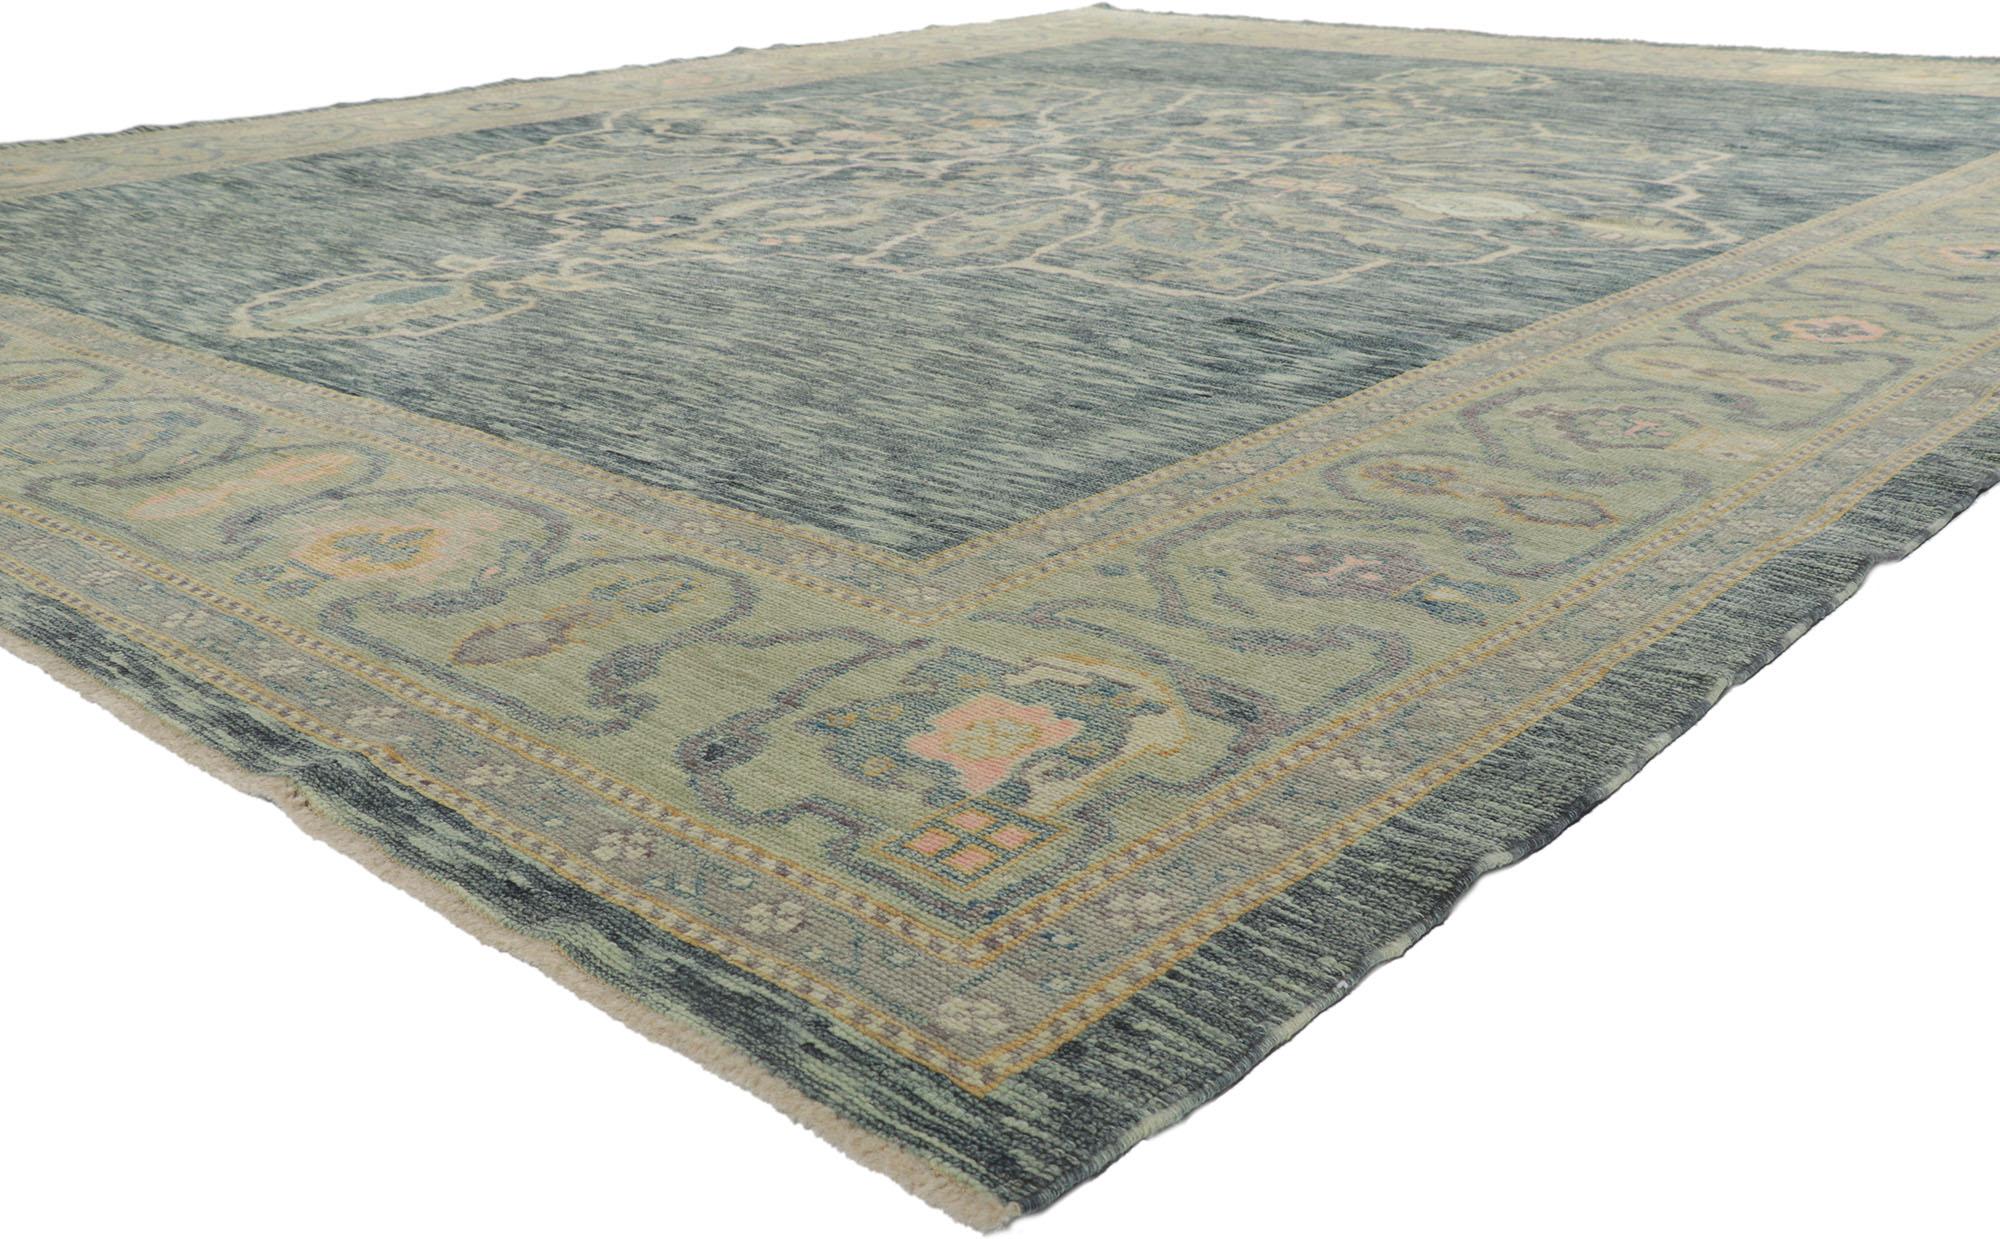 53780 New Contemporary Turkish Oushak Rug with Modern Style 12'02 x 14'09. With its effortless beauty and timeless design, this hand knotted wool contemporary Turkish Oushak rug is poised to impress. Taking center stage is grand-scale open medallion